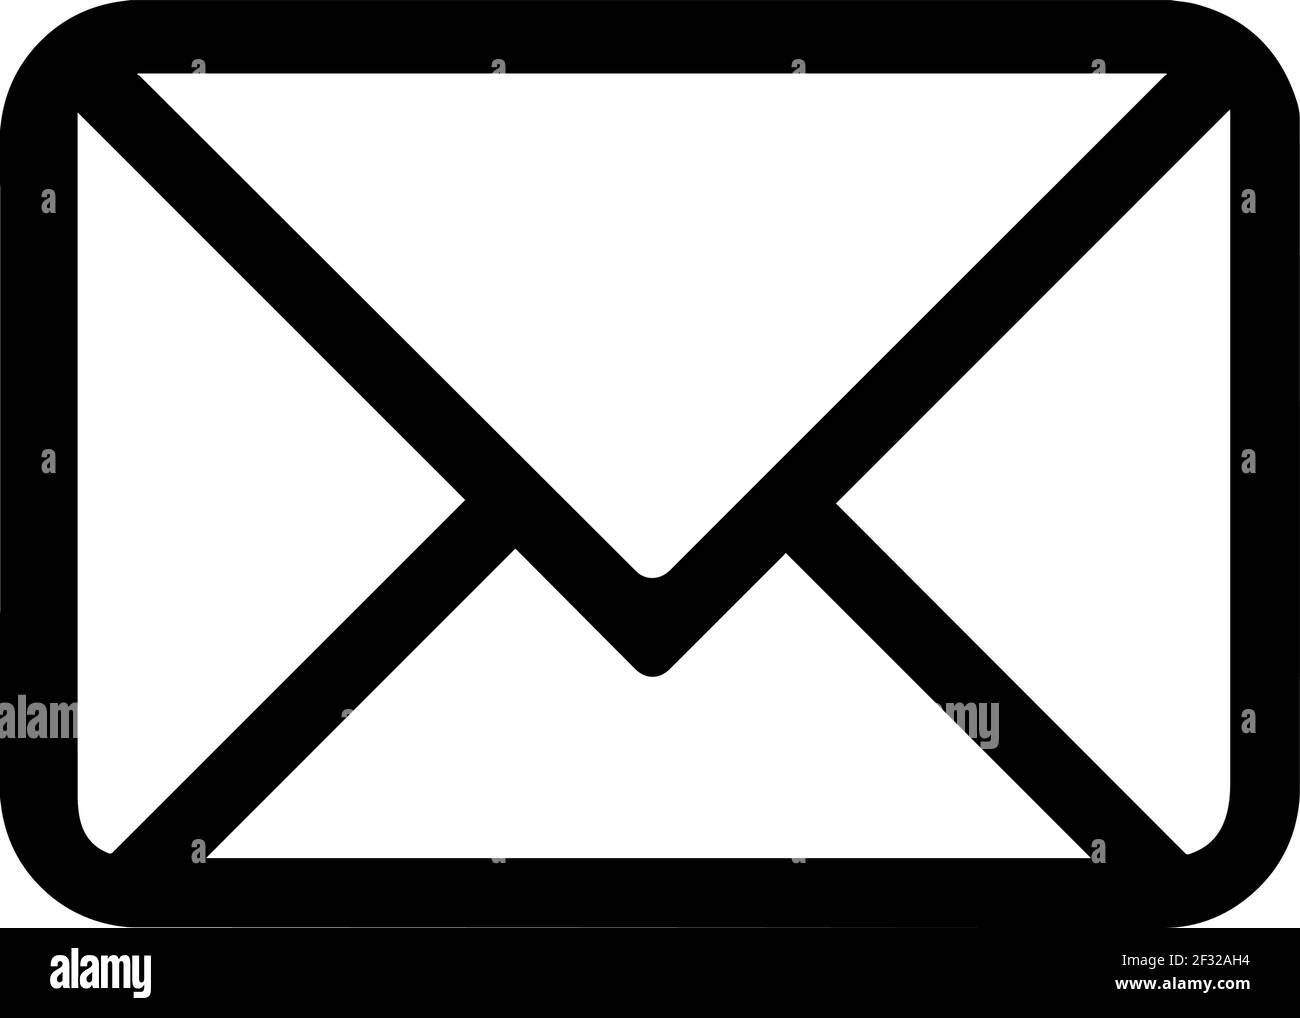 Mail flat icon. E-mail pictogram. Unread mail symbol. Logo design. For internet and websites. Vector illustration. Stock Vector